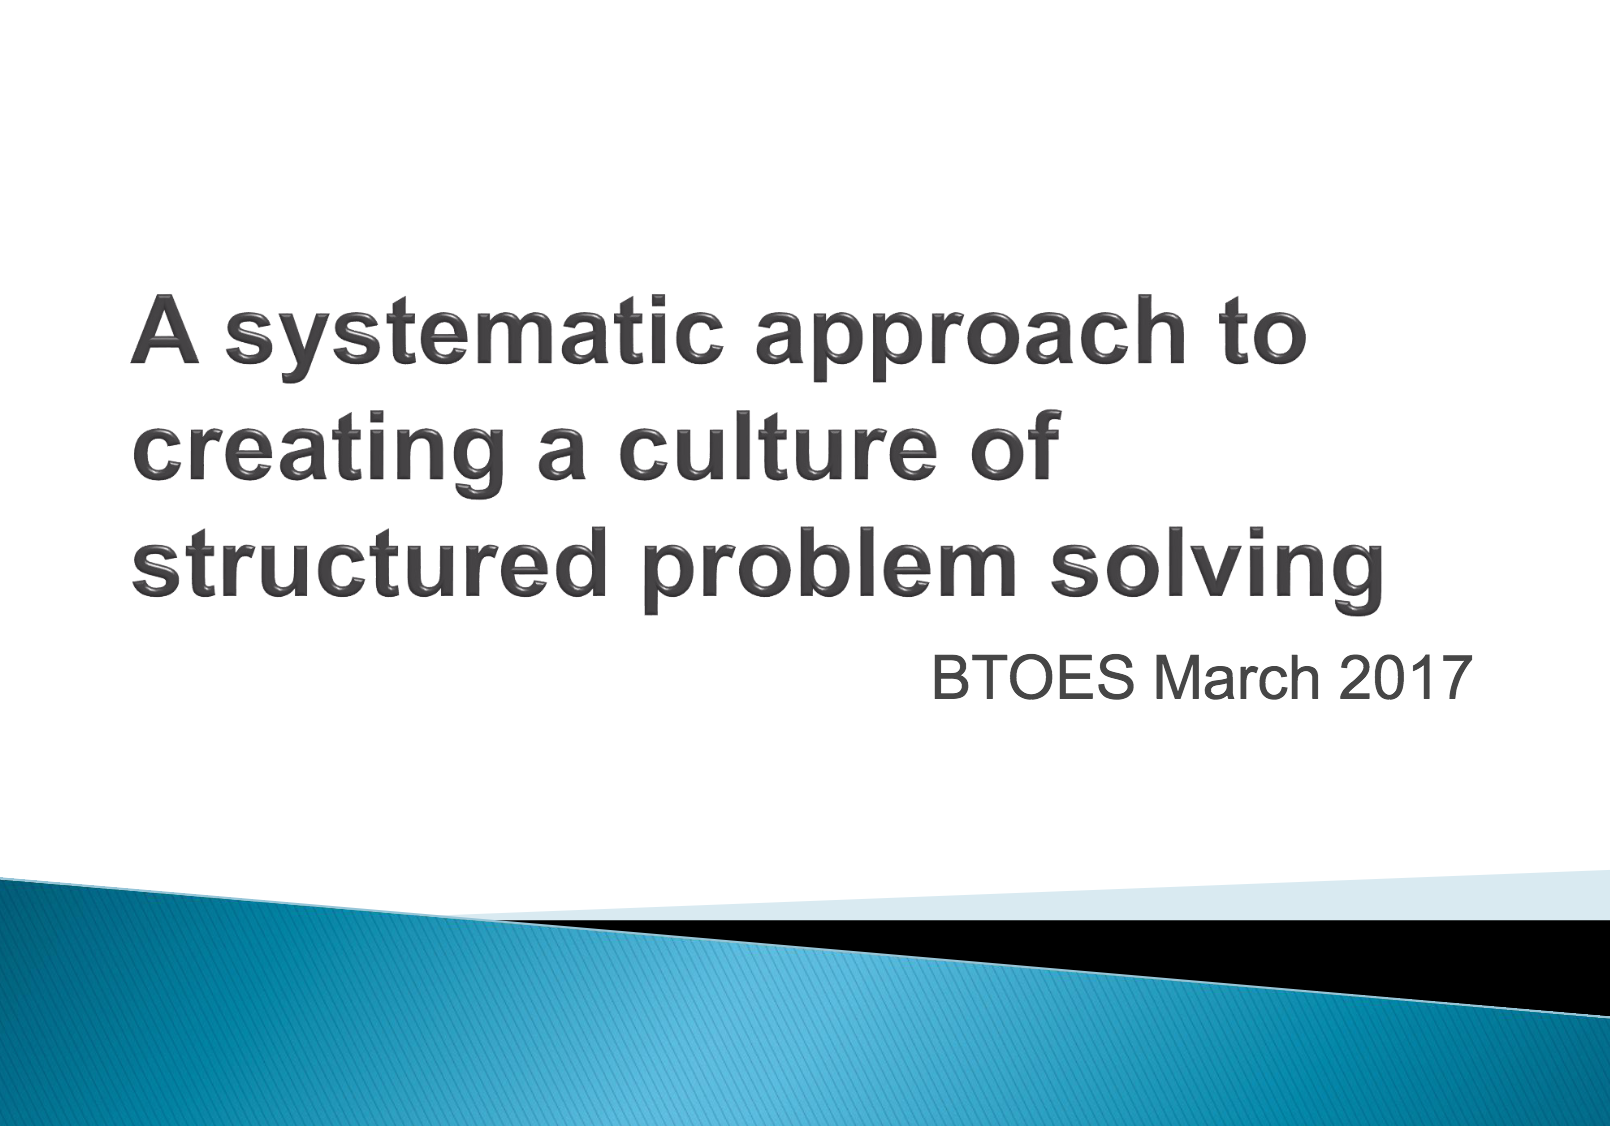 A systematic approach to creating a culture of structured problem solving